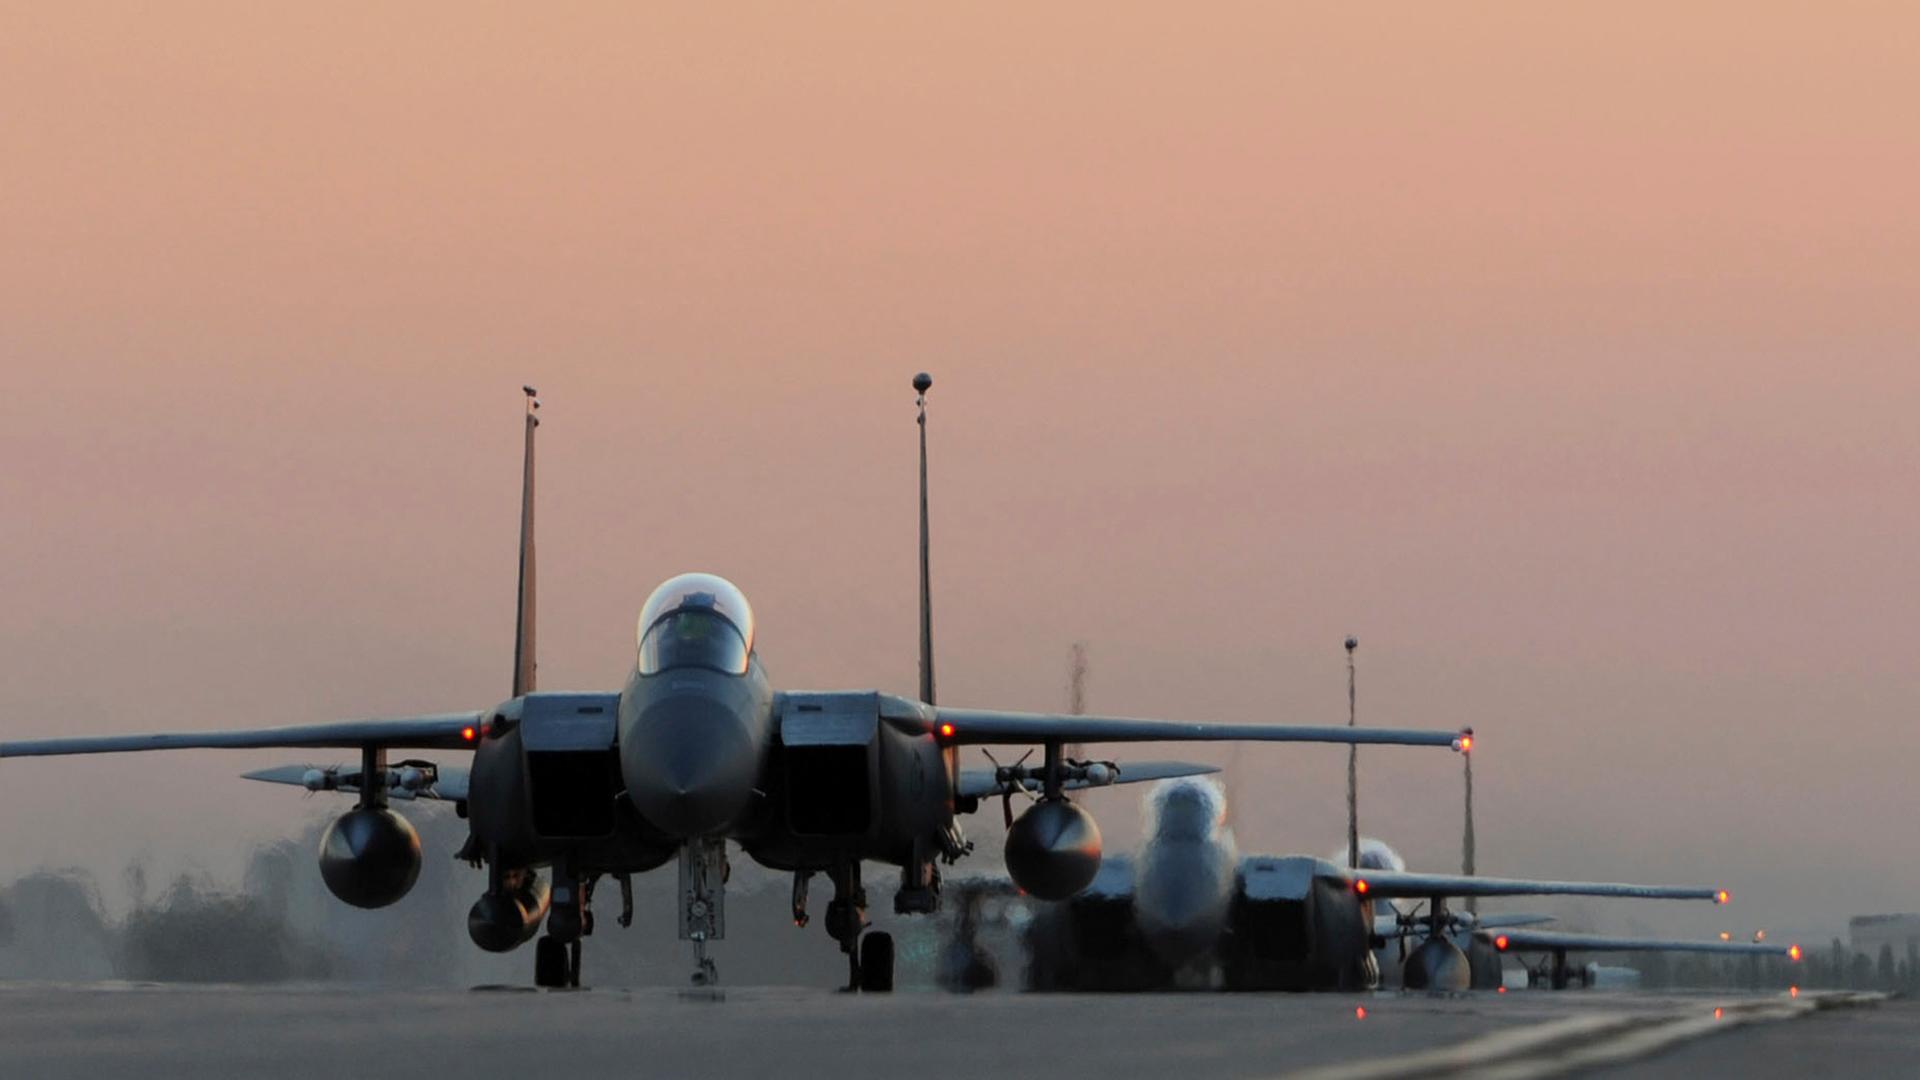 US Air Force F-15E Strike Eagles taxi the runway after landing at Incirlik Air Base, Turkey. Six F-15Es are deployed in support of anti-ISIS operations in Iraq and Syria.